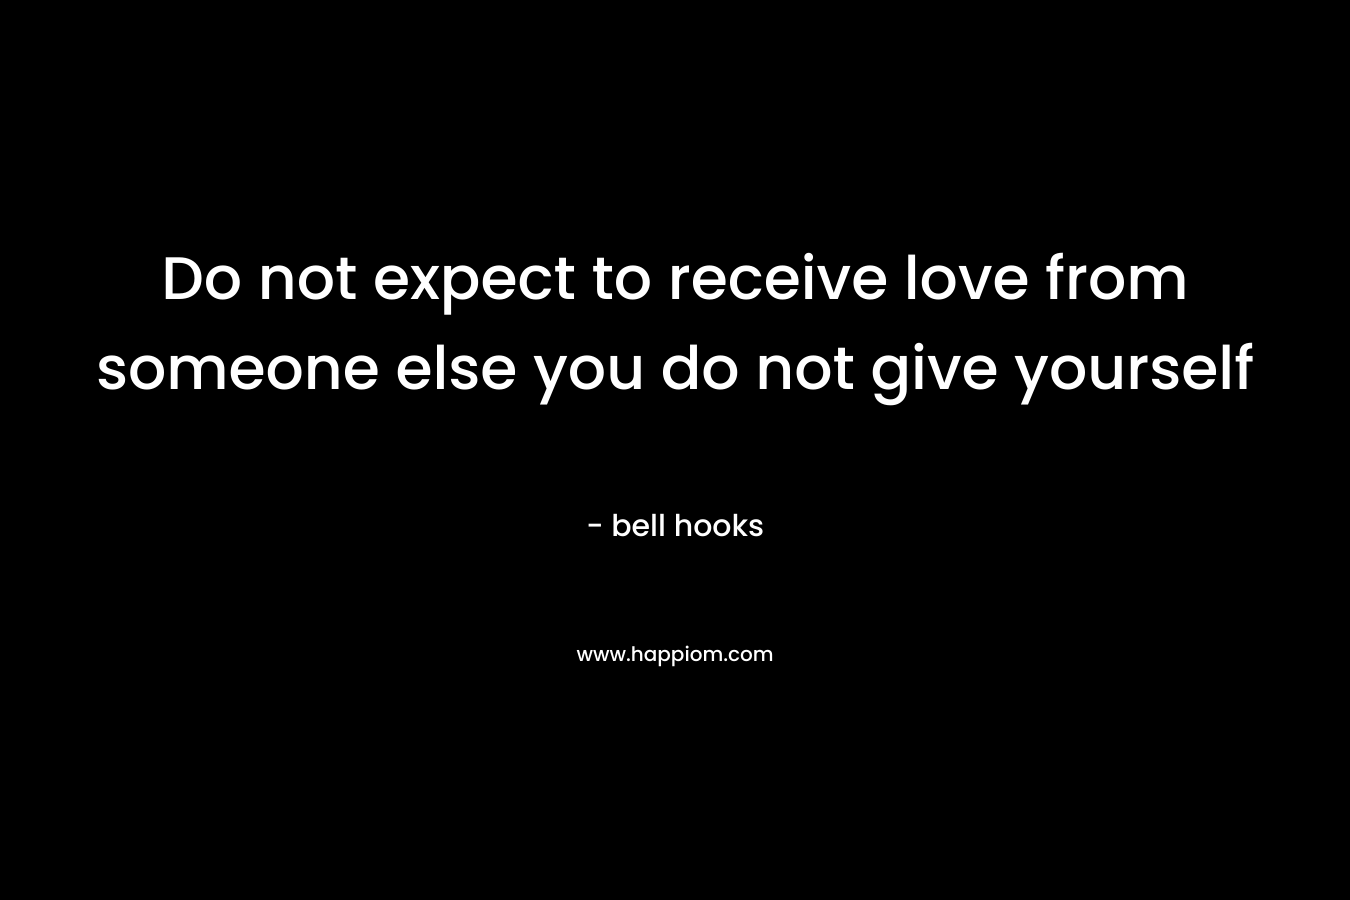 Do not expect to receive love from someone else you do not give yourself